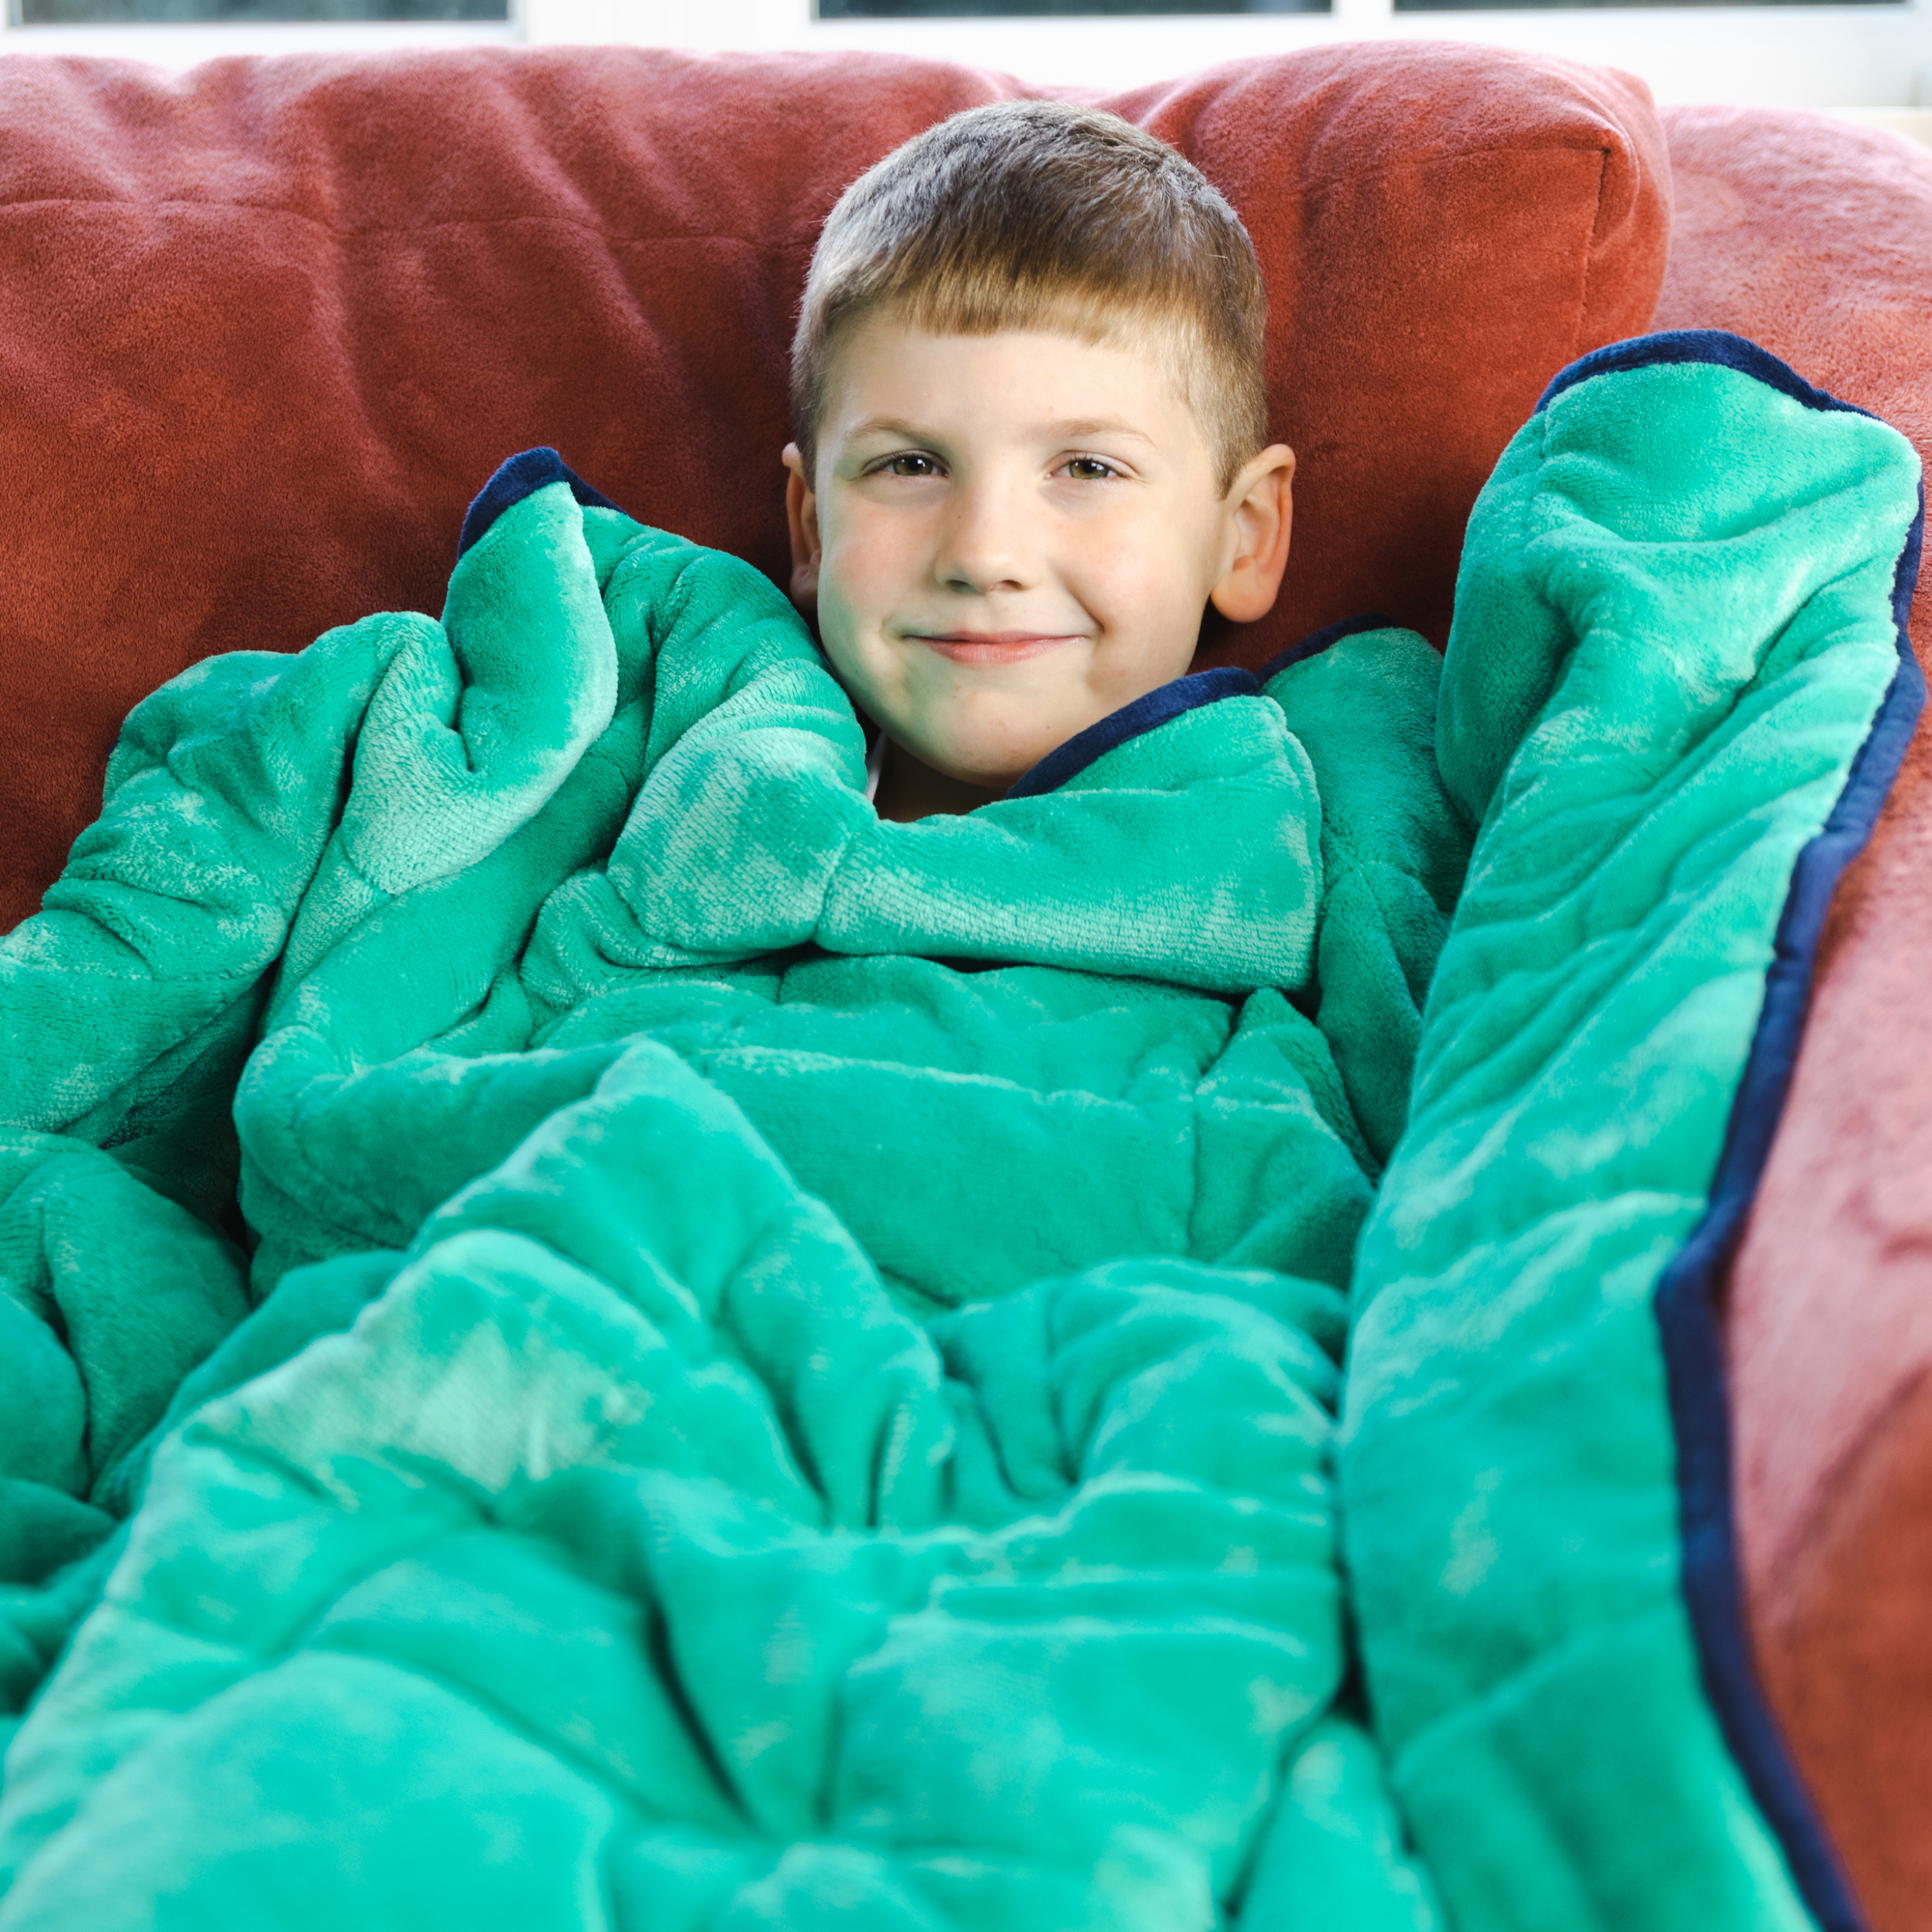 Bouncyband Soft Fleece Weighted 7lb Small Sensory Blanket for Kids, 56" x 36" image number null